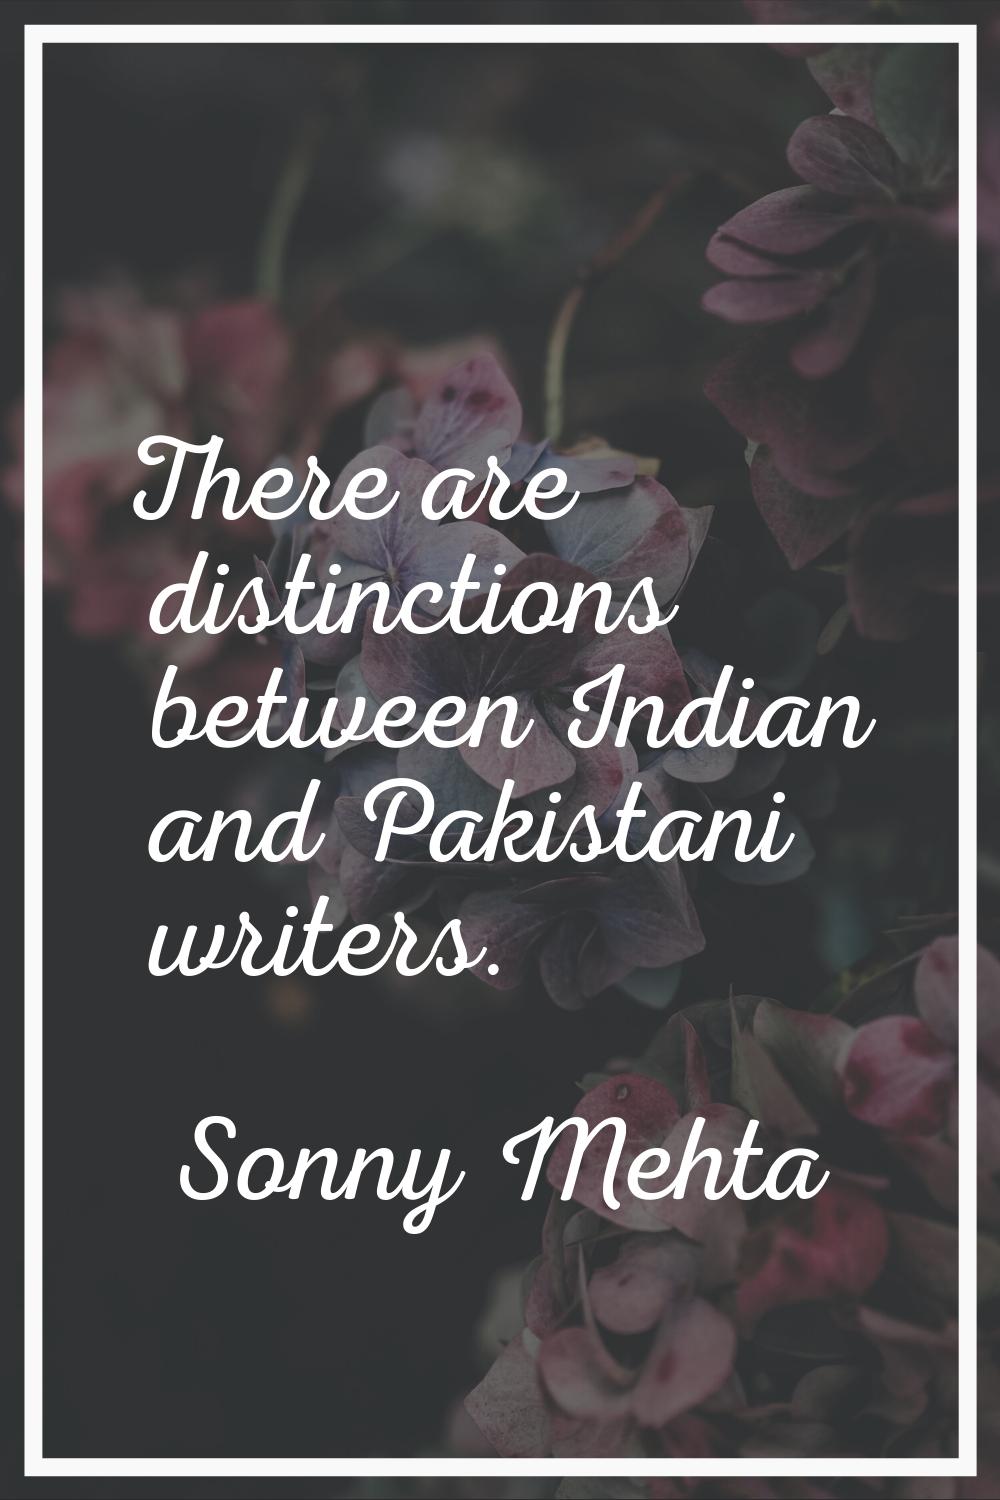 There are distinctions between Indian and Pakistani writers.